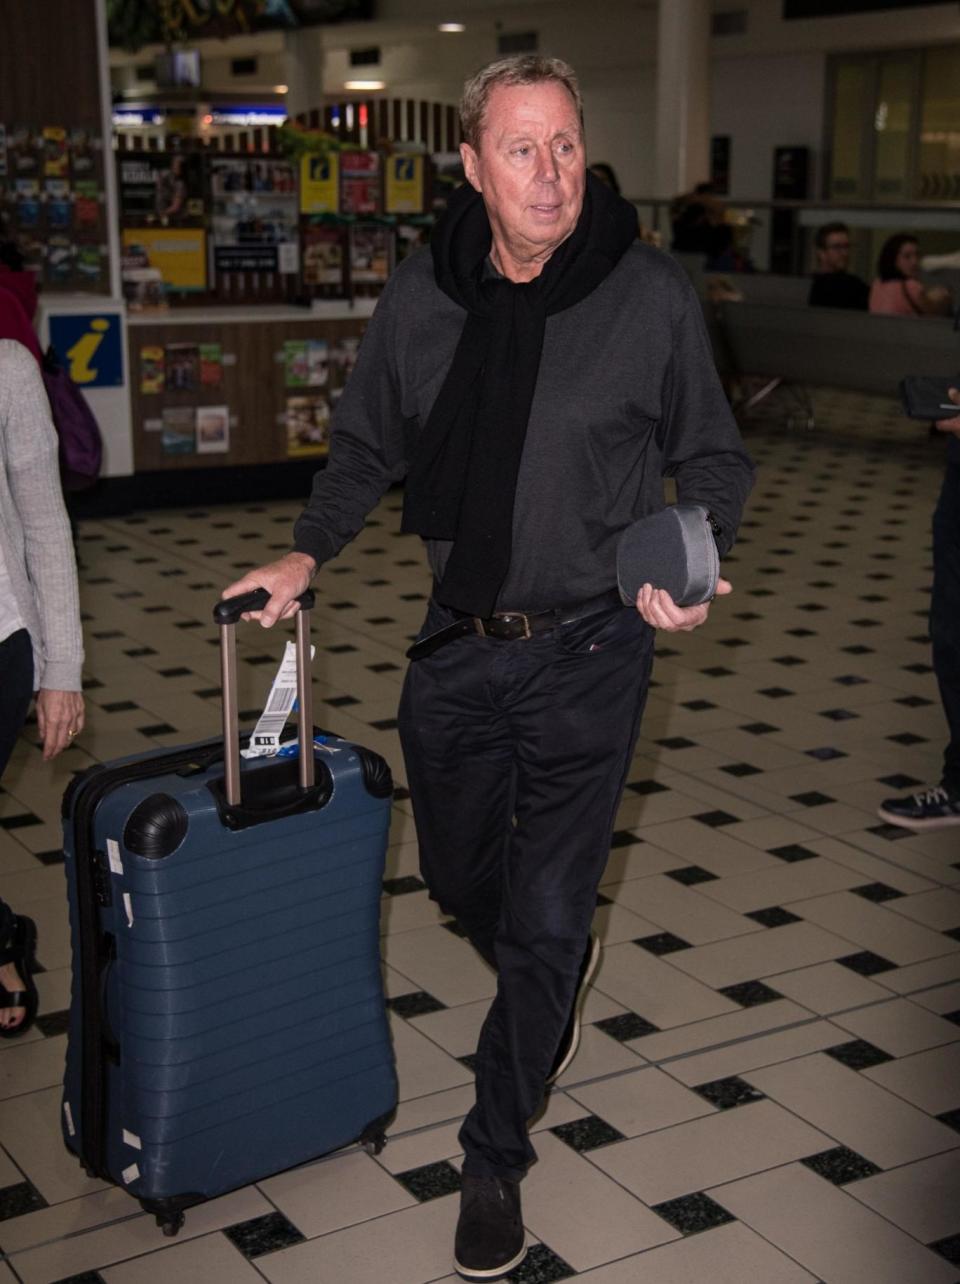 Touch down: Harry Redknapp has landed Down Under (James Gourley/REX)